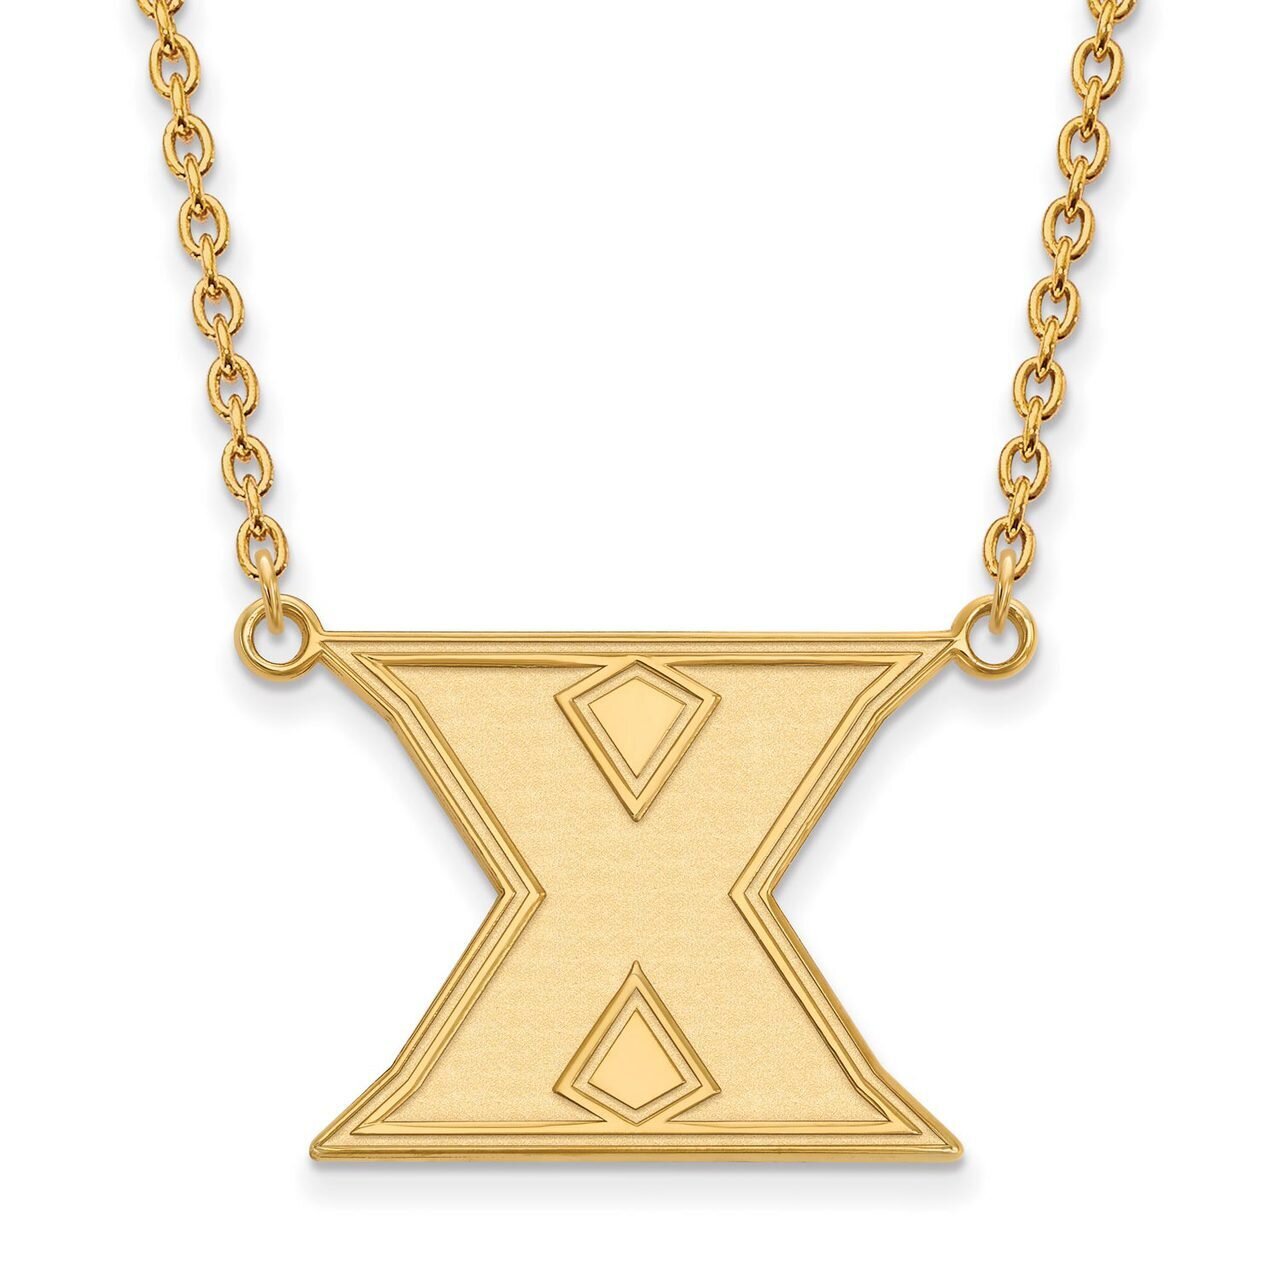 Xavier University Large Pendant with Chain Necklace Gold-plated Silver GP007XU-18